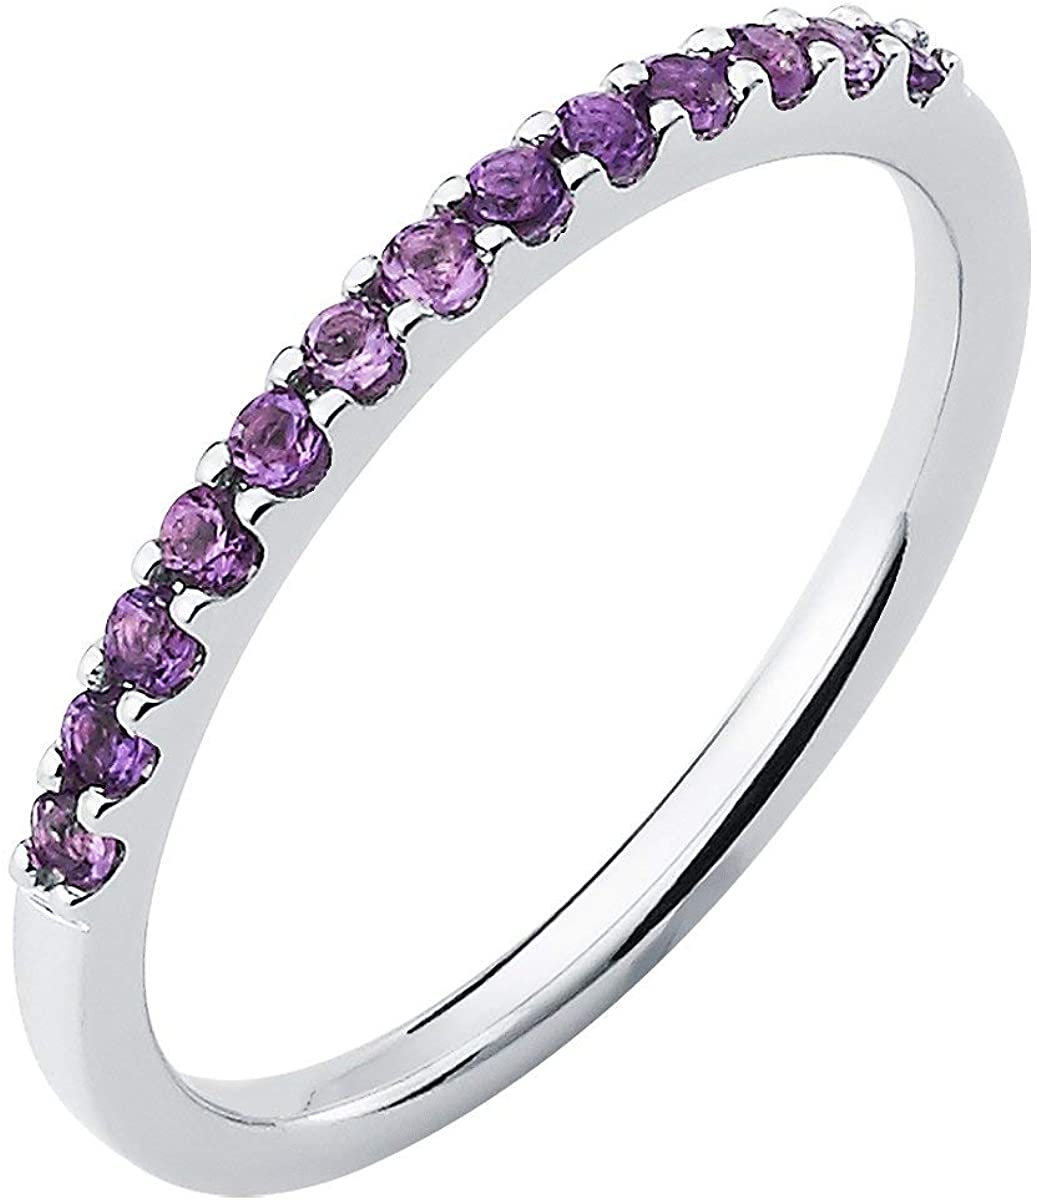 14K White Gold 1/5 Cttw Natural Amethyst Stackable 2MM Wedding Anniversary Band Ring - February Birthstone, Size 6